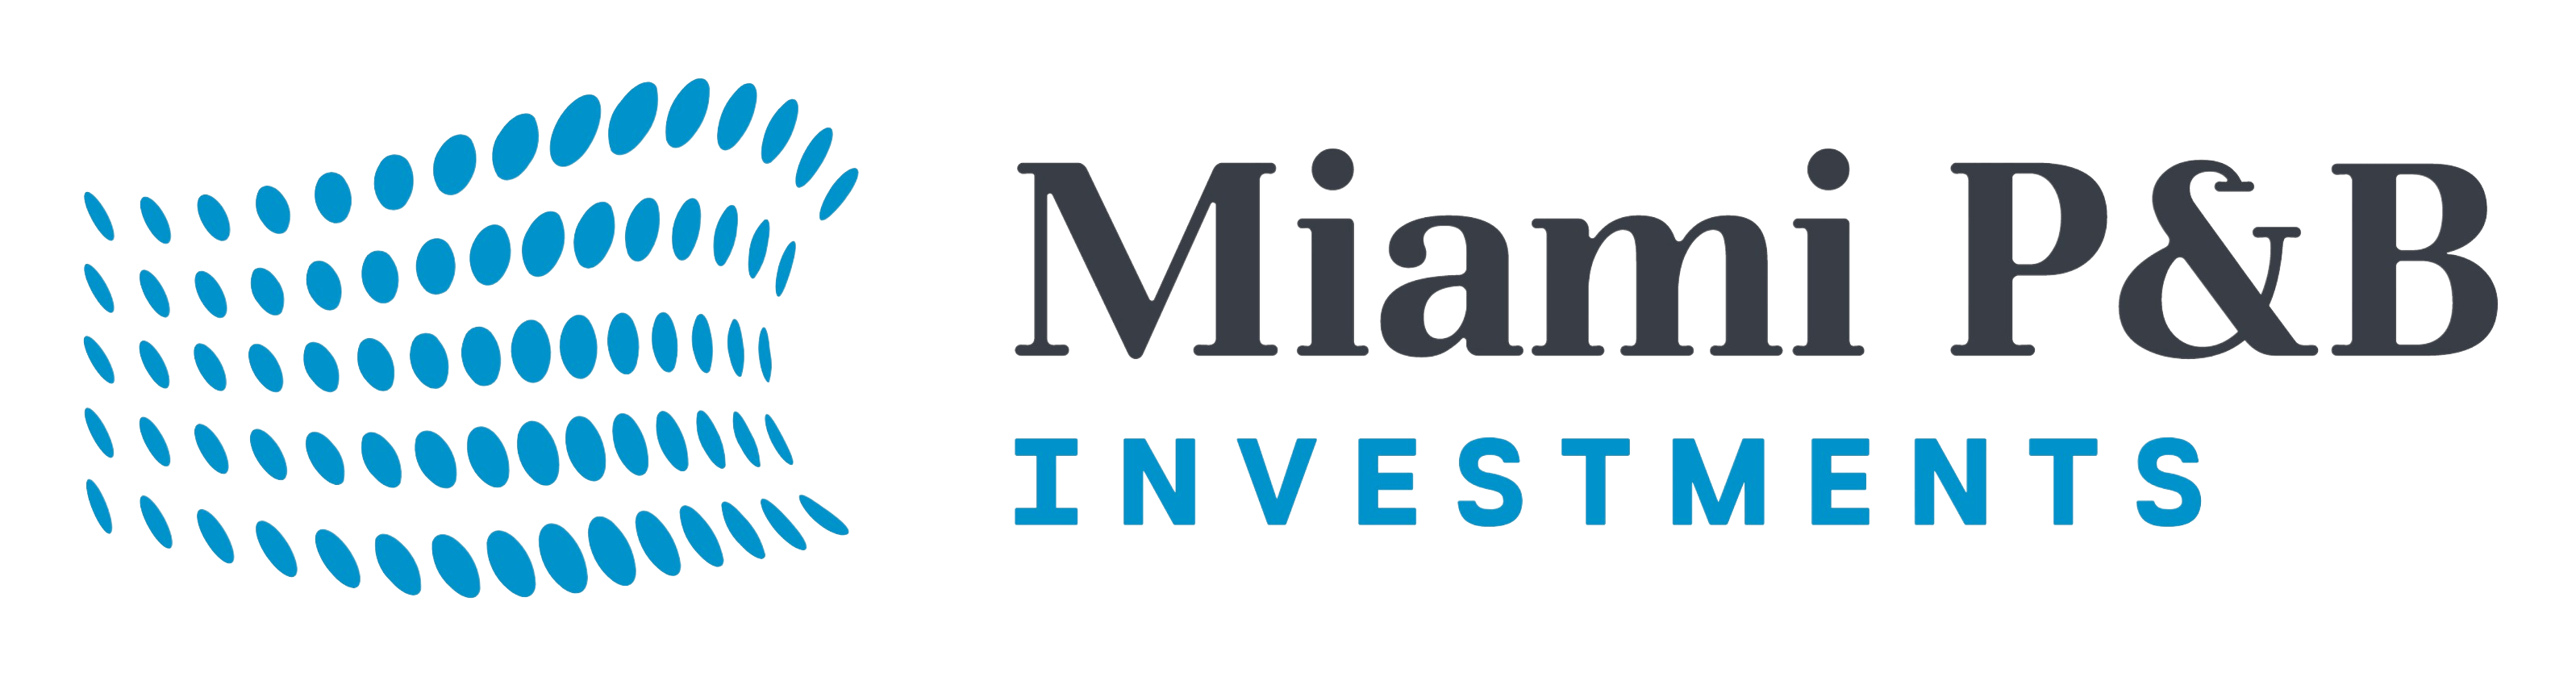 Empowering Miami's Growth and Prosperity